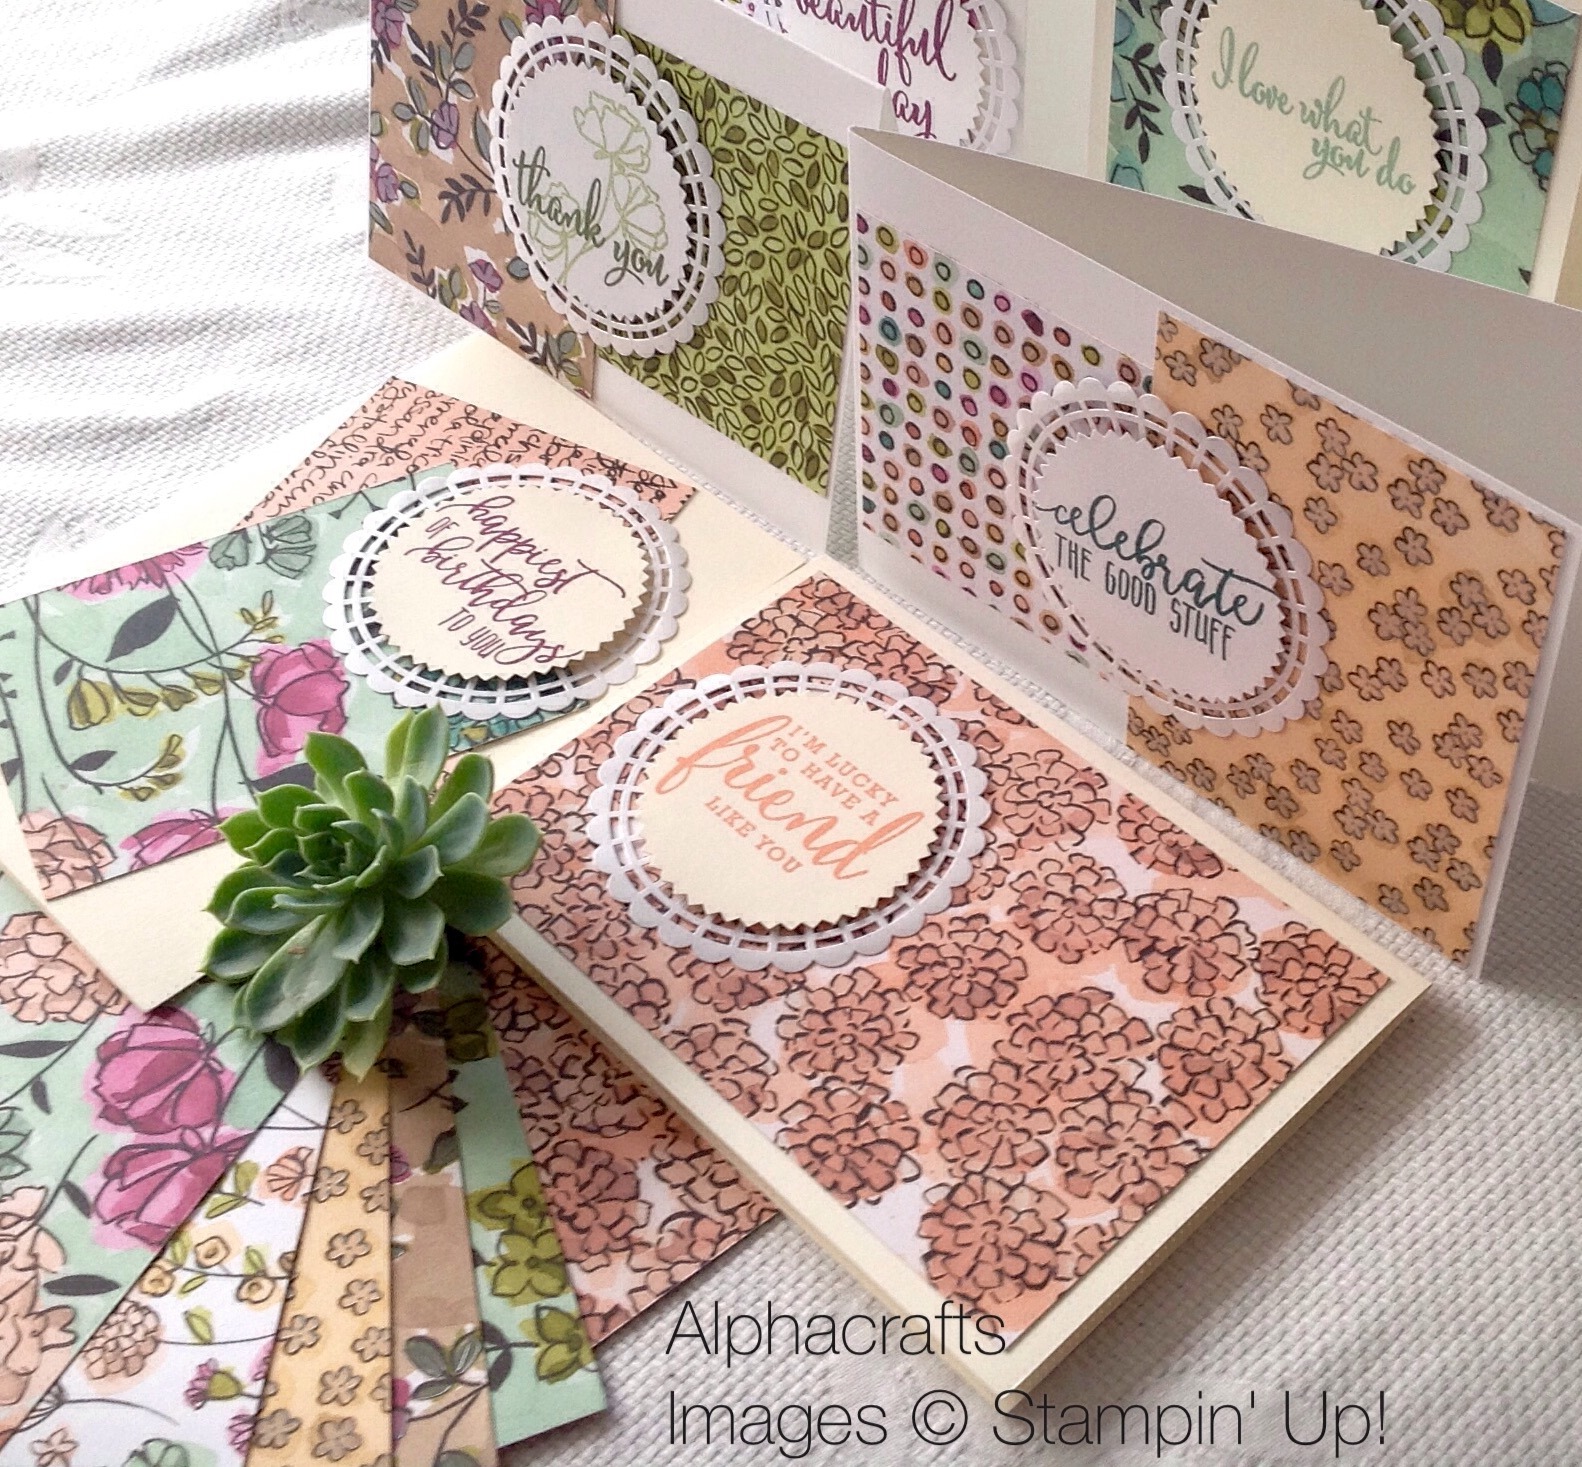 Share What You Love Designer Series  Paper (DSP) used in cardmaking.